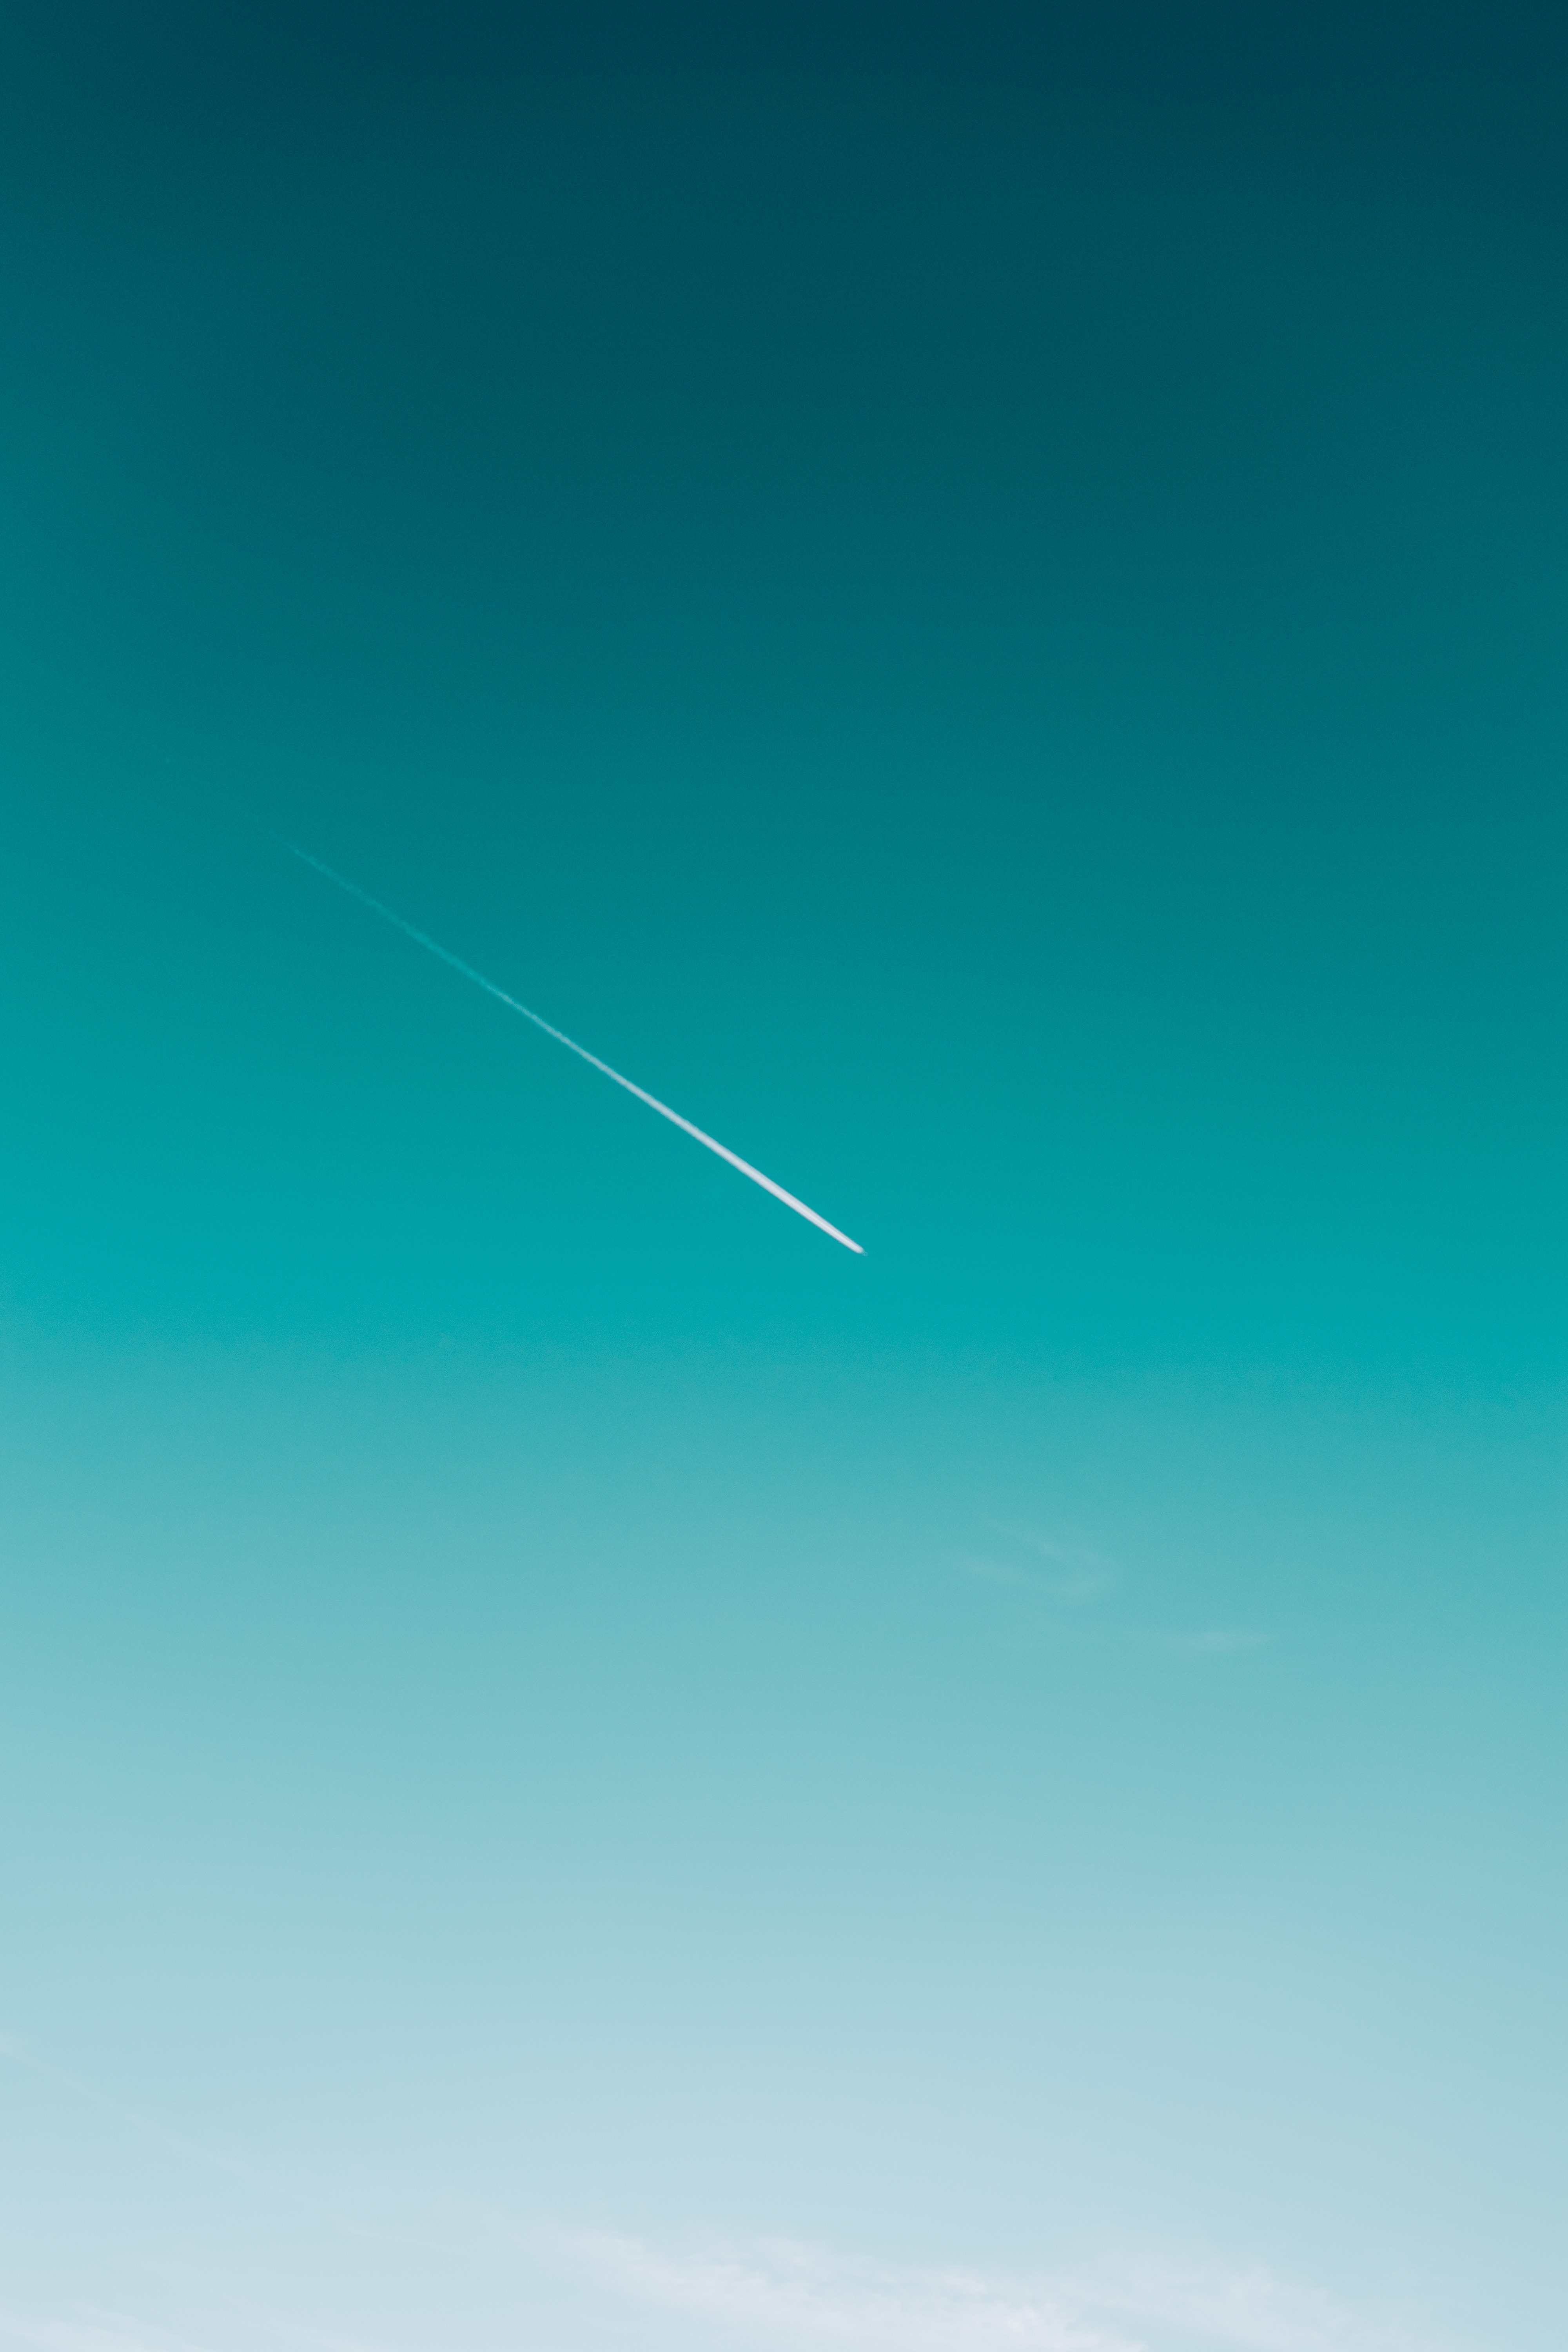 vertical wallpaper minimalism, sky, plane, airplane, track, trace